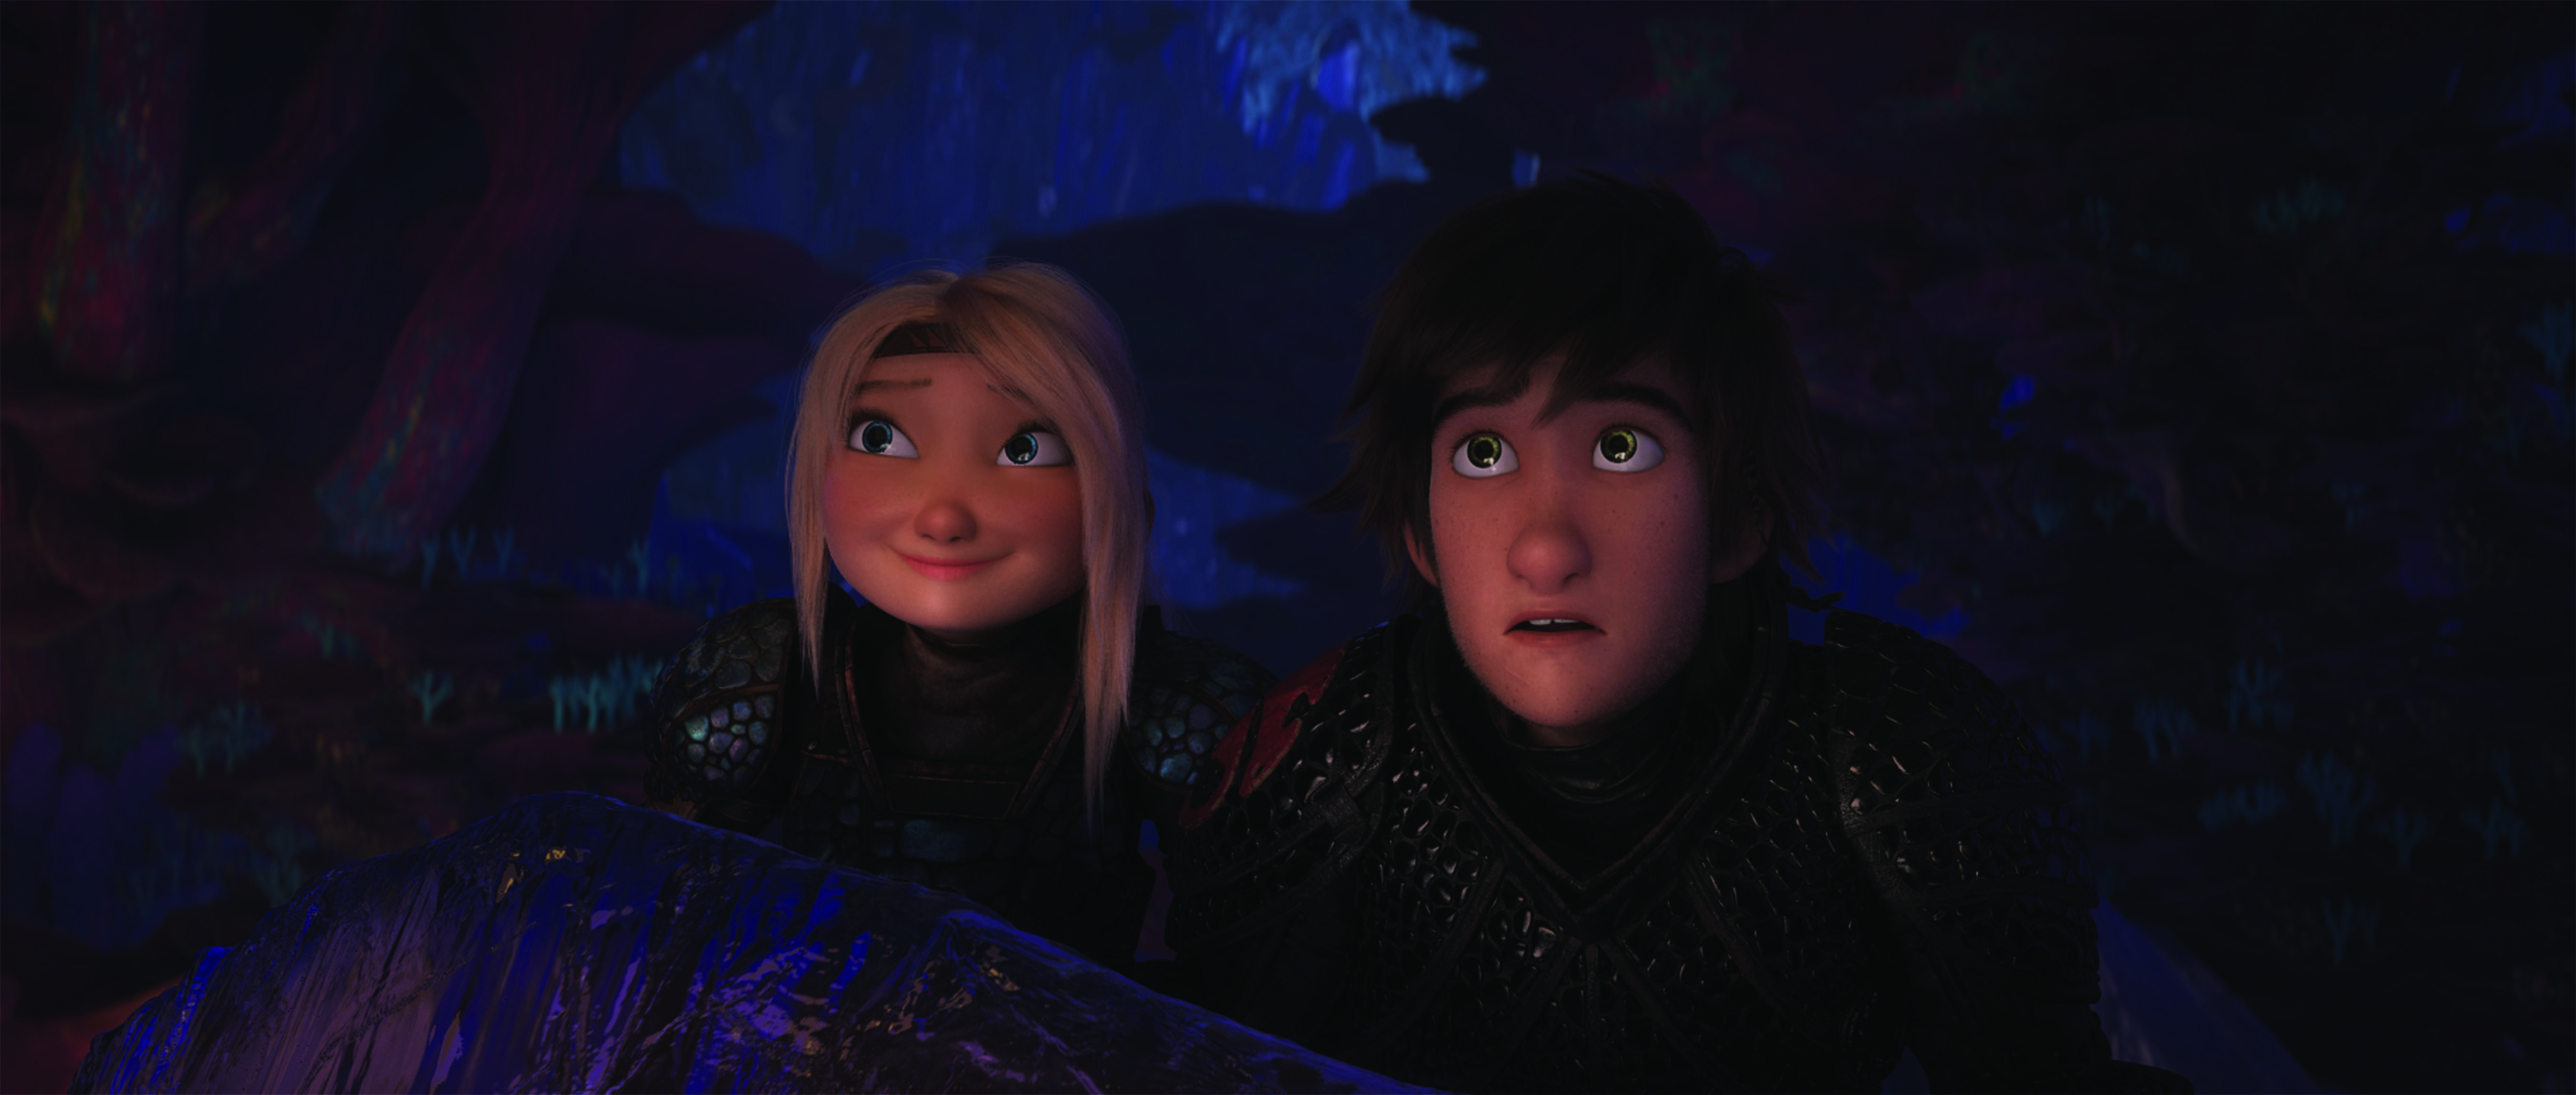 How To Train Your Dragon 3: The Hidden World